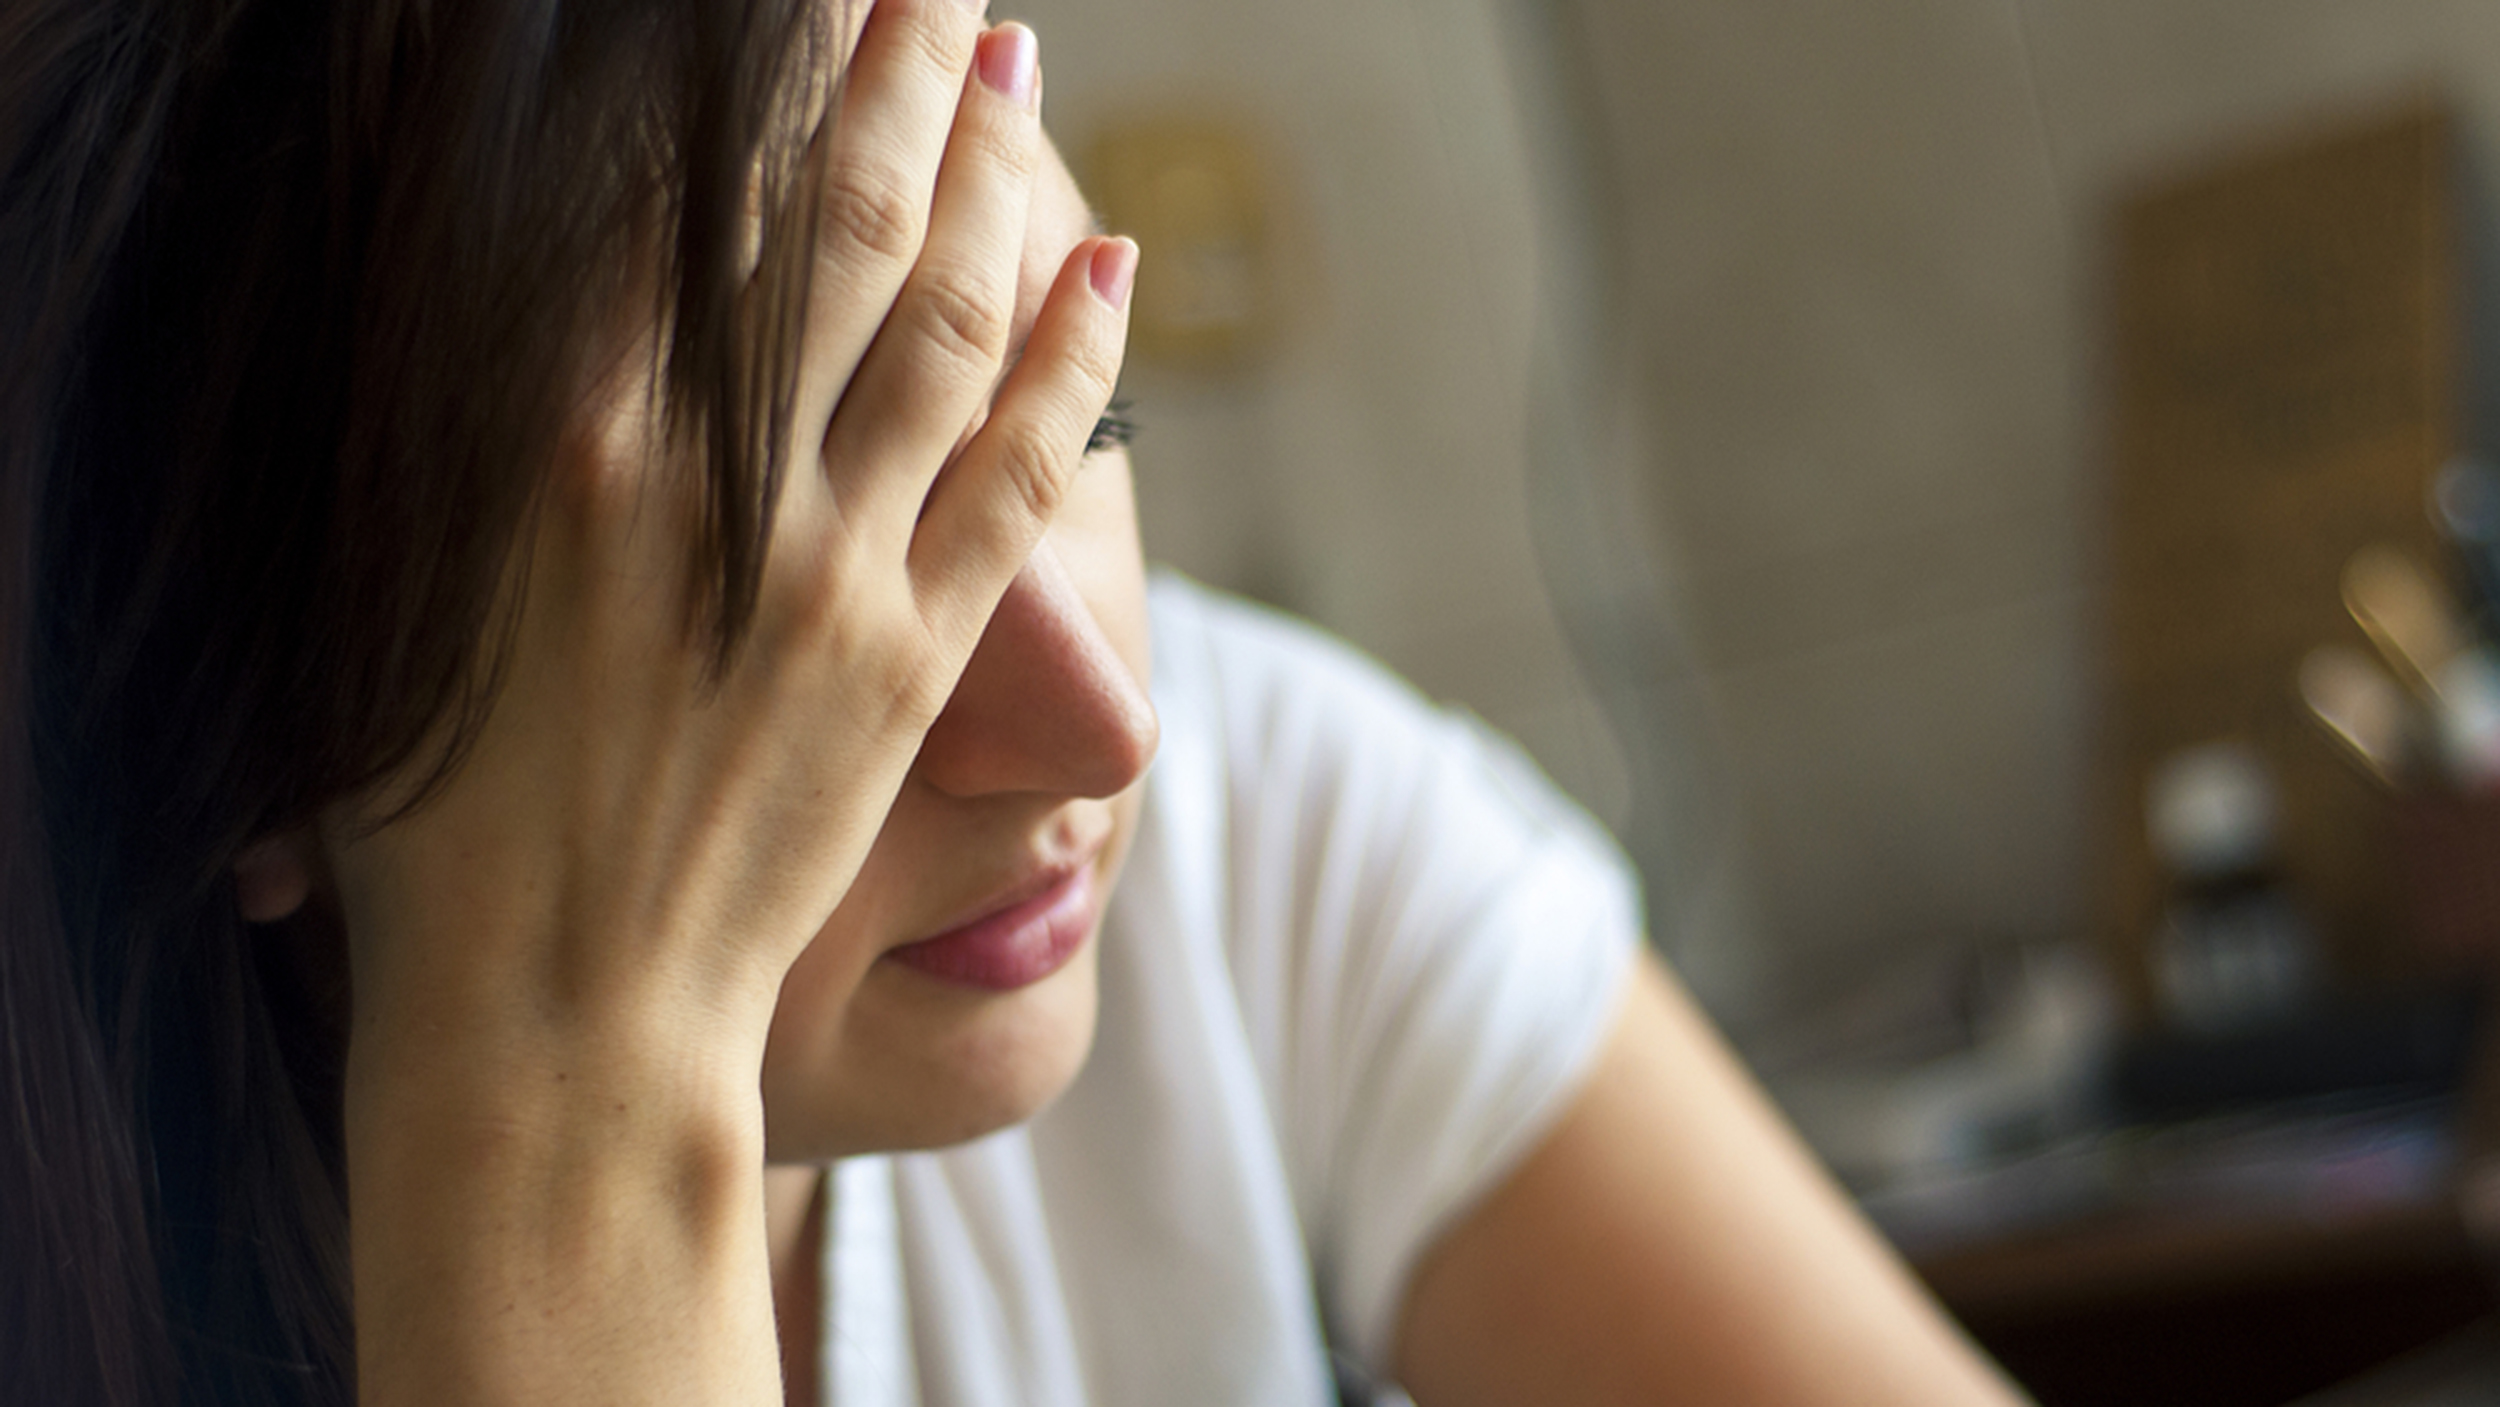 Tips to Control the Migraine While Traveling